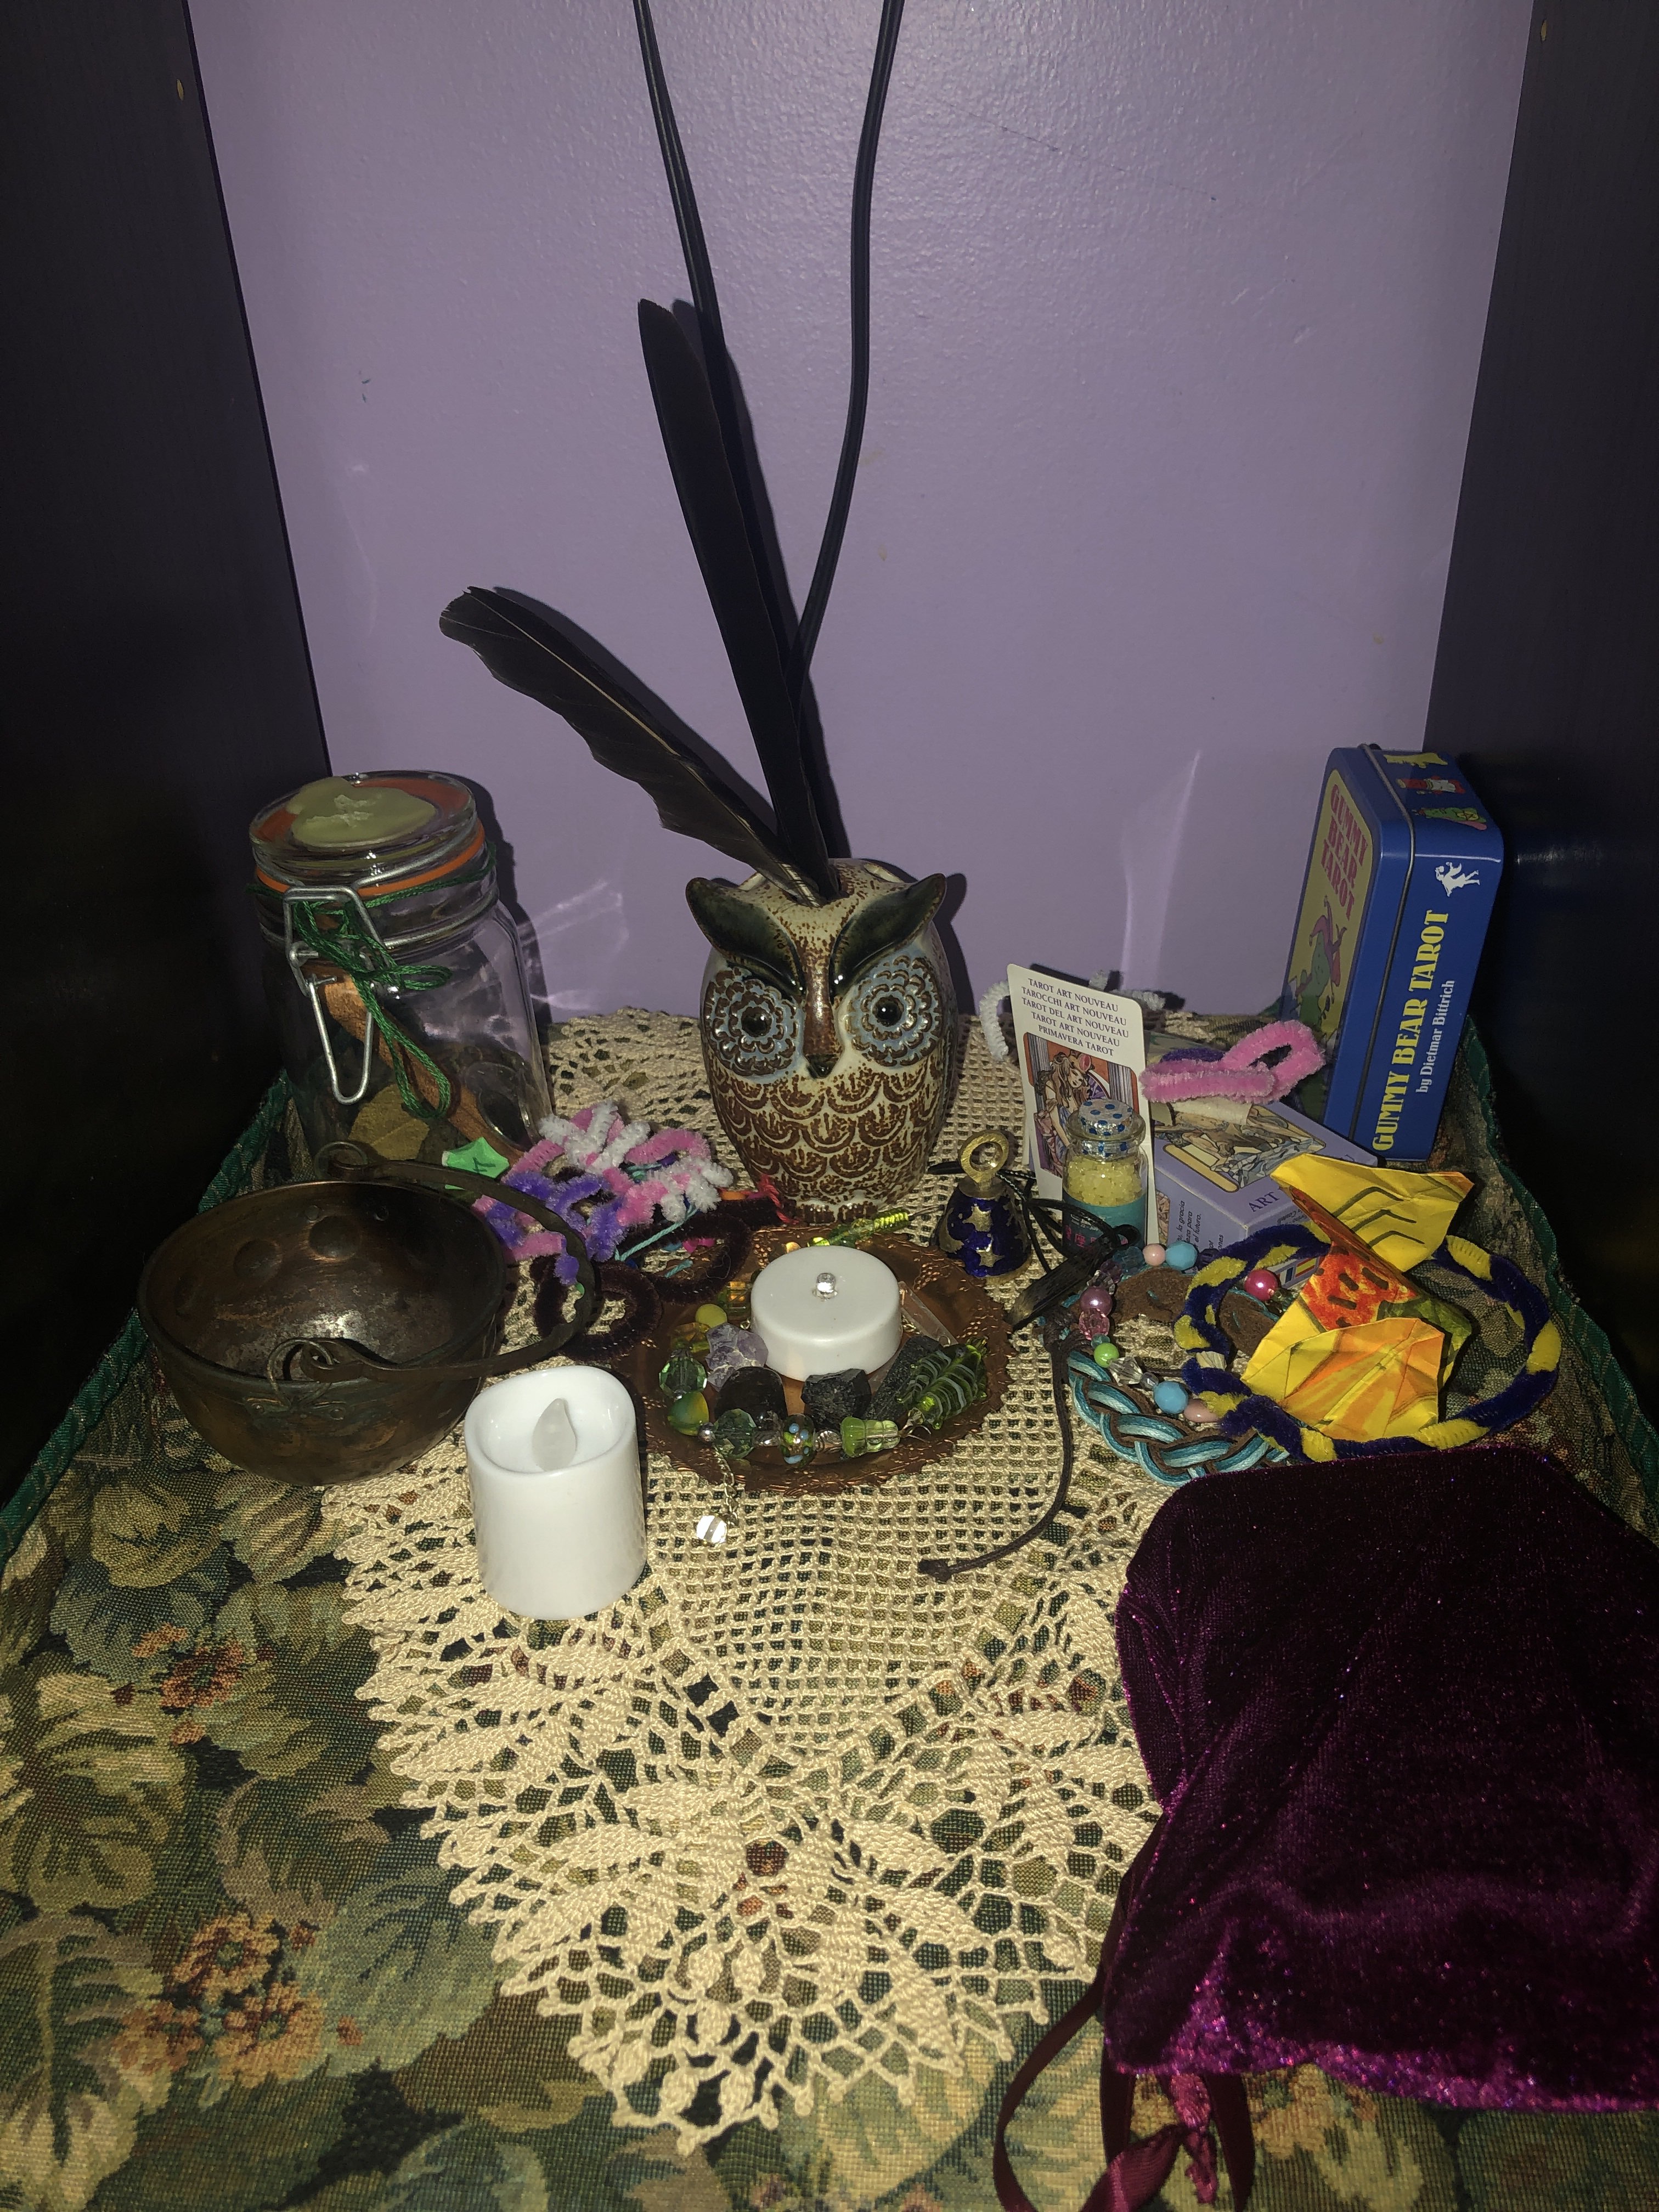 A photo of my altar devoted to Athena. There is a green leaf placemat with a beige lace placemat above it. On the altar there are tarot decks, battery candles, a bowl, jars, an owl figurine with real feathers in it, and various craft objects.